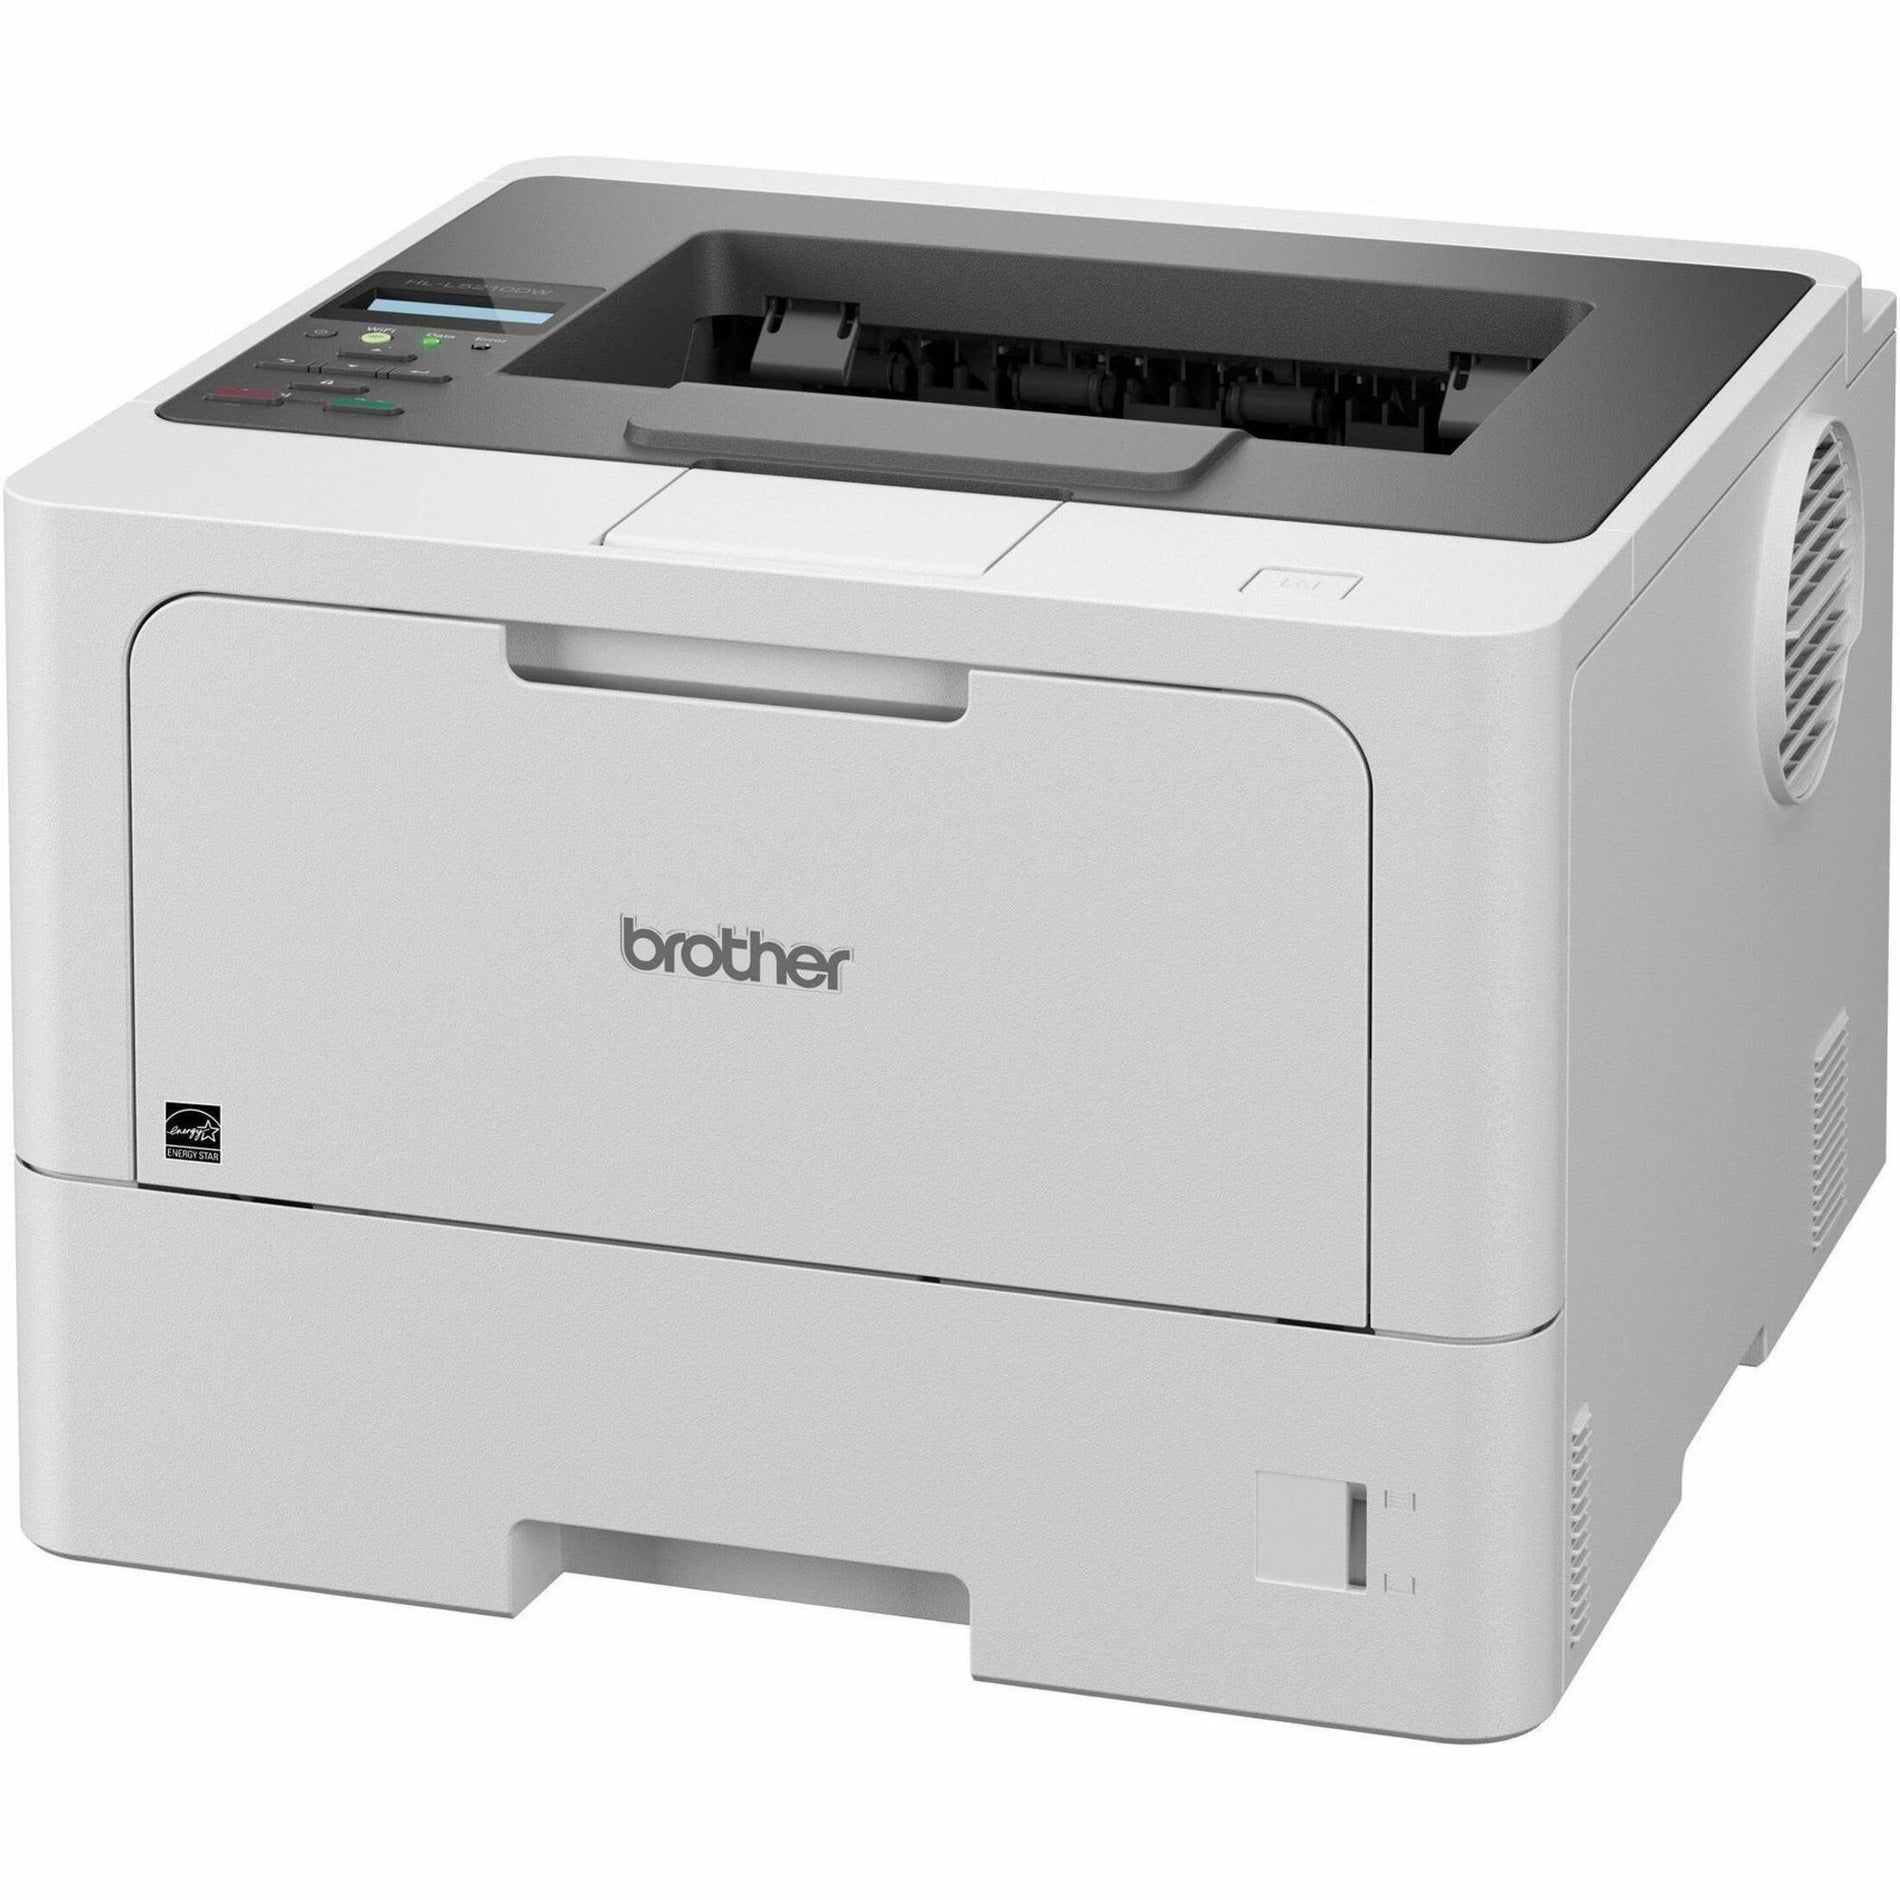 Brother HLL5210DW HL-L5210DW Professional Wireless A4 Mono Laser Printer, Duplex Printing, Mobile Device Printing